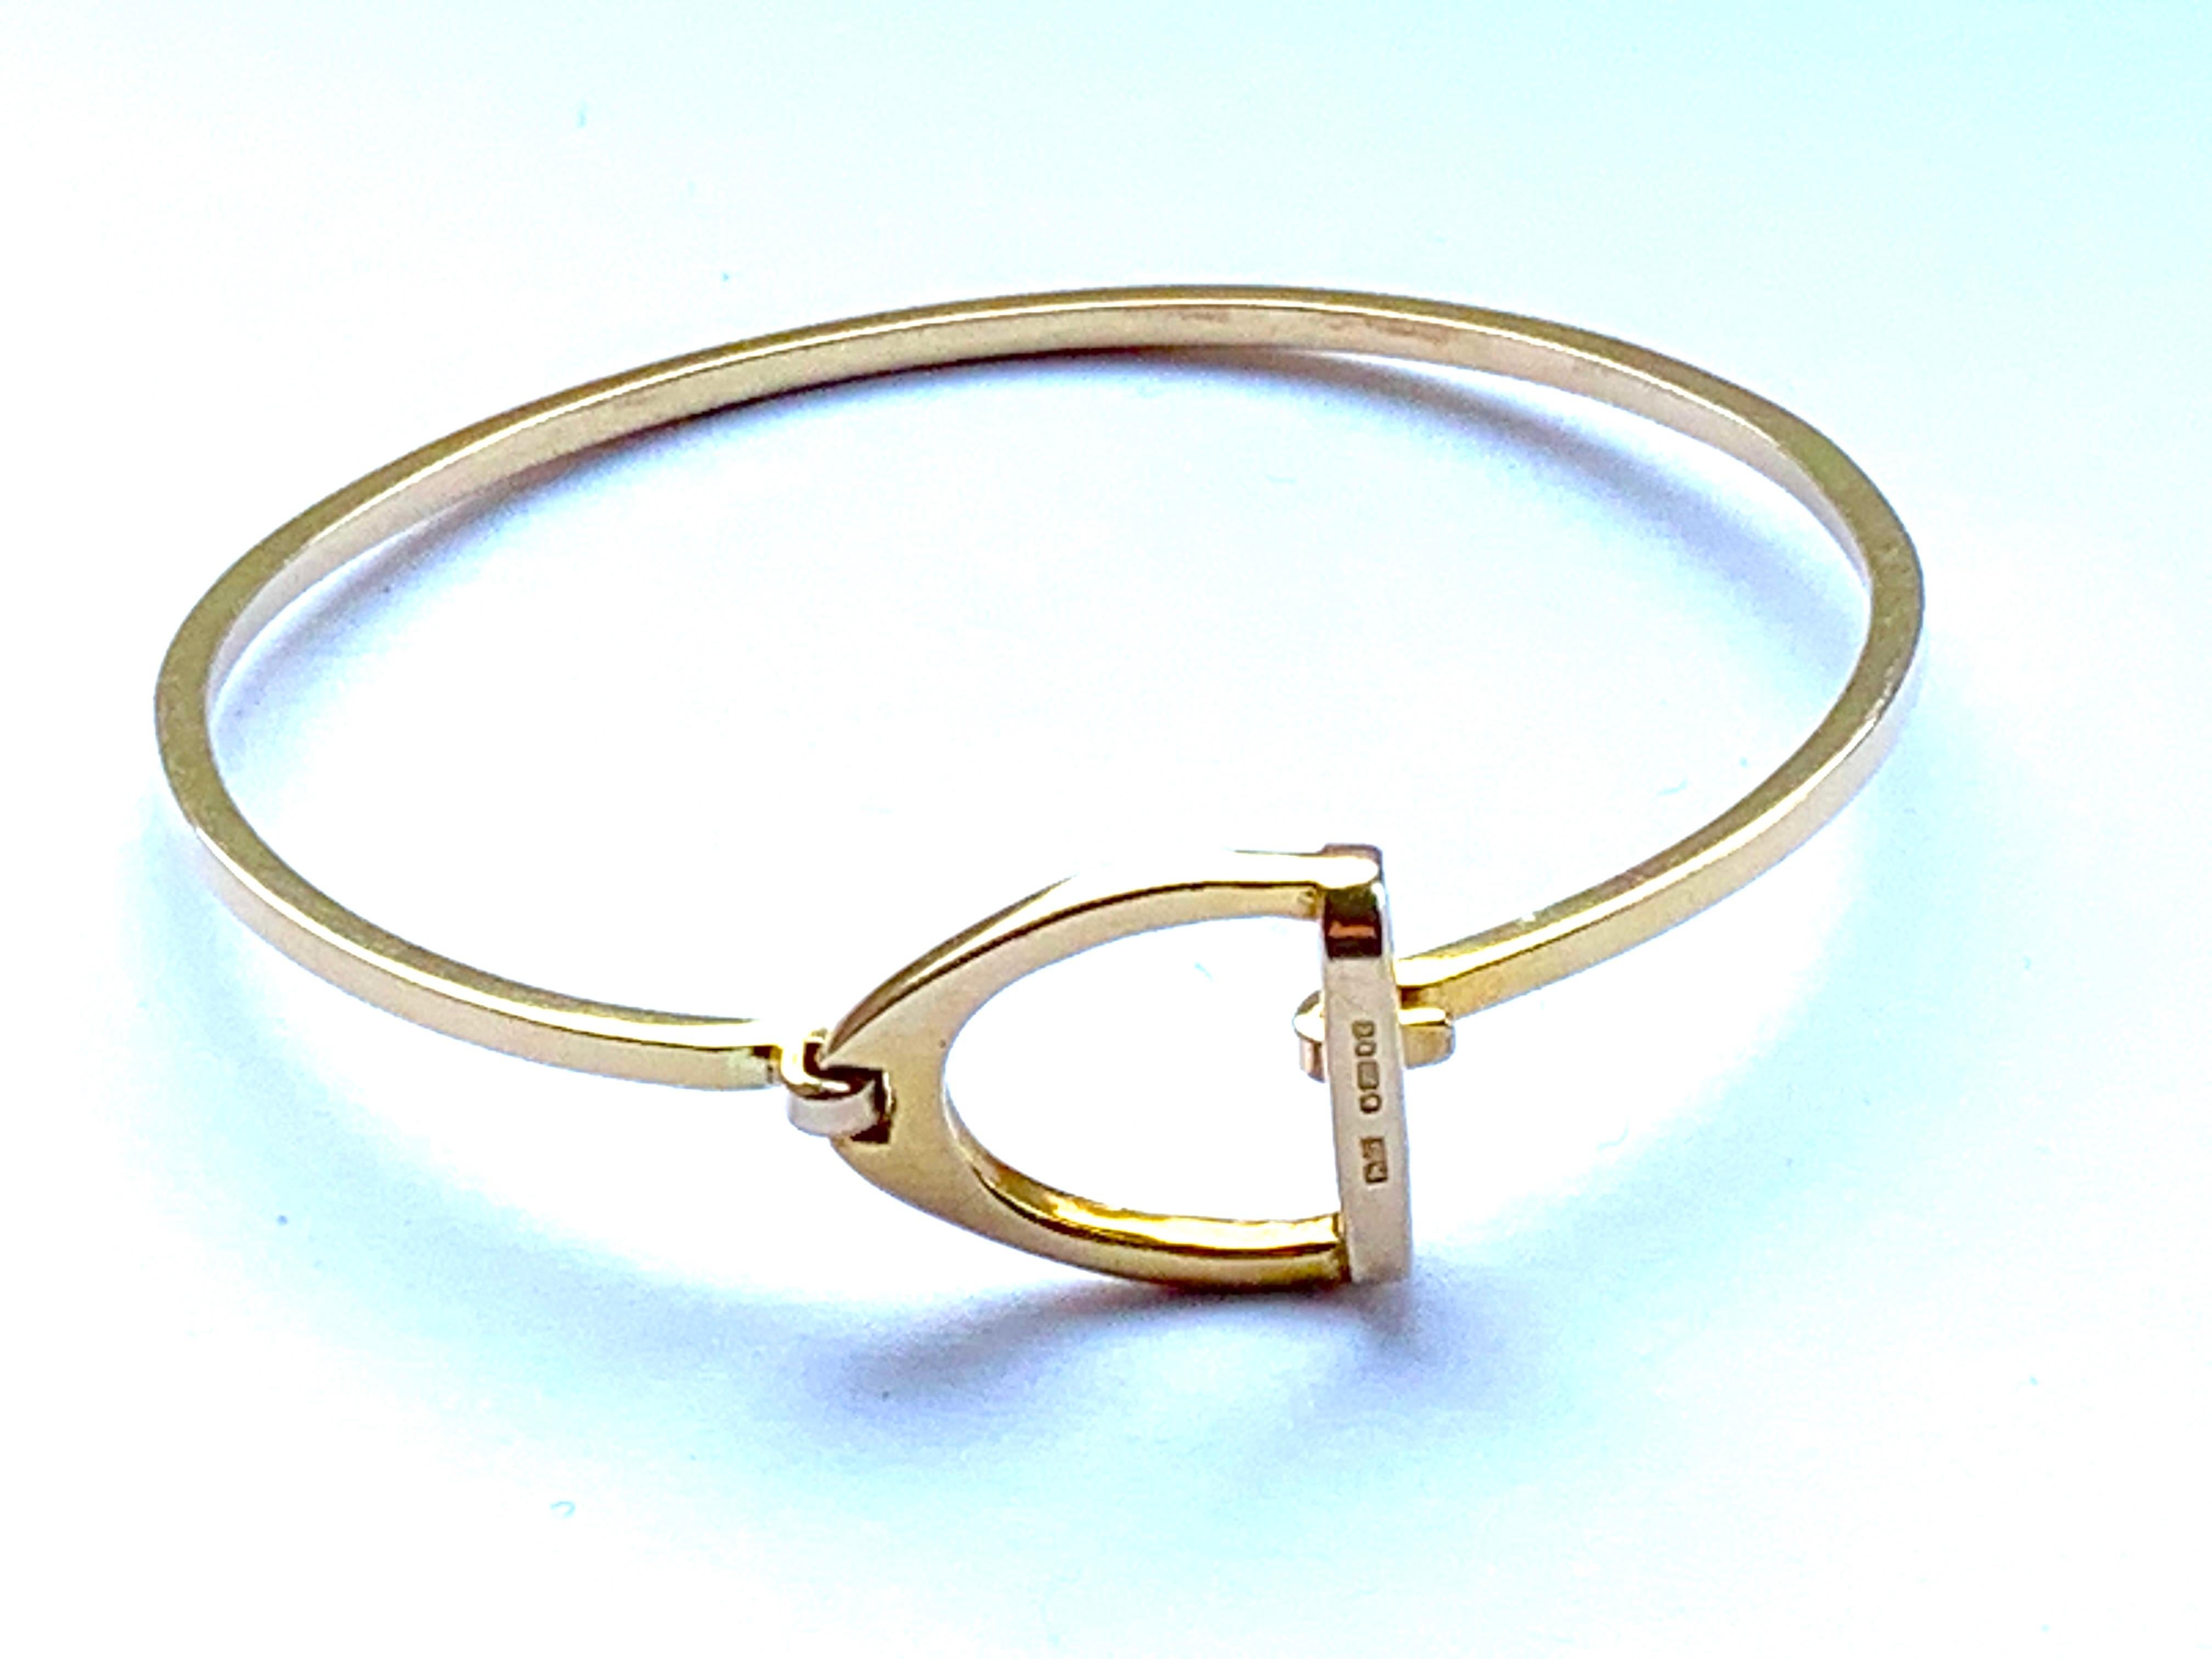 
9ct 375 Gold Bracelet
Equestrian design
Tight and secure fastener - with strong safety chain
Fully Hallmarked on the stirrup
Circumference 18.85 cm
Diameter  9.42 cm
Maximum wrist fit 7.2 Inches
Bracelet Thickness  2mm milimetres
Total Weight  11